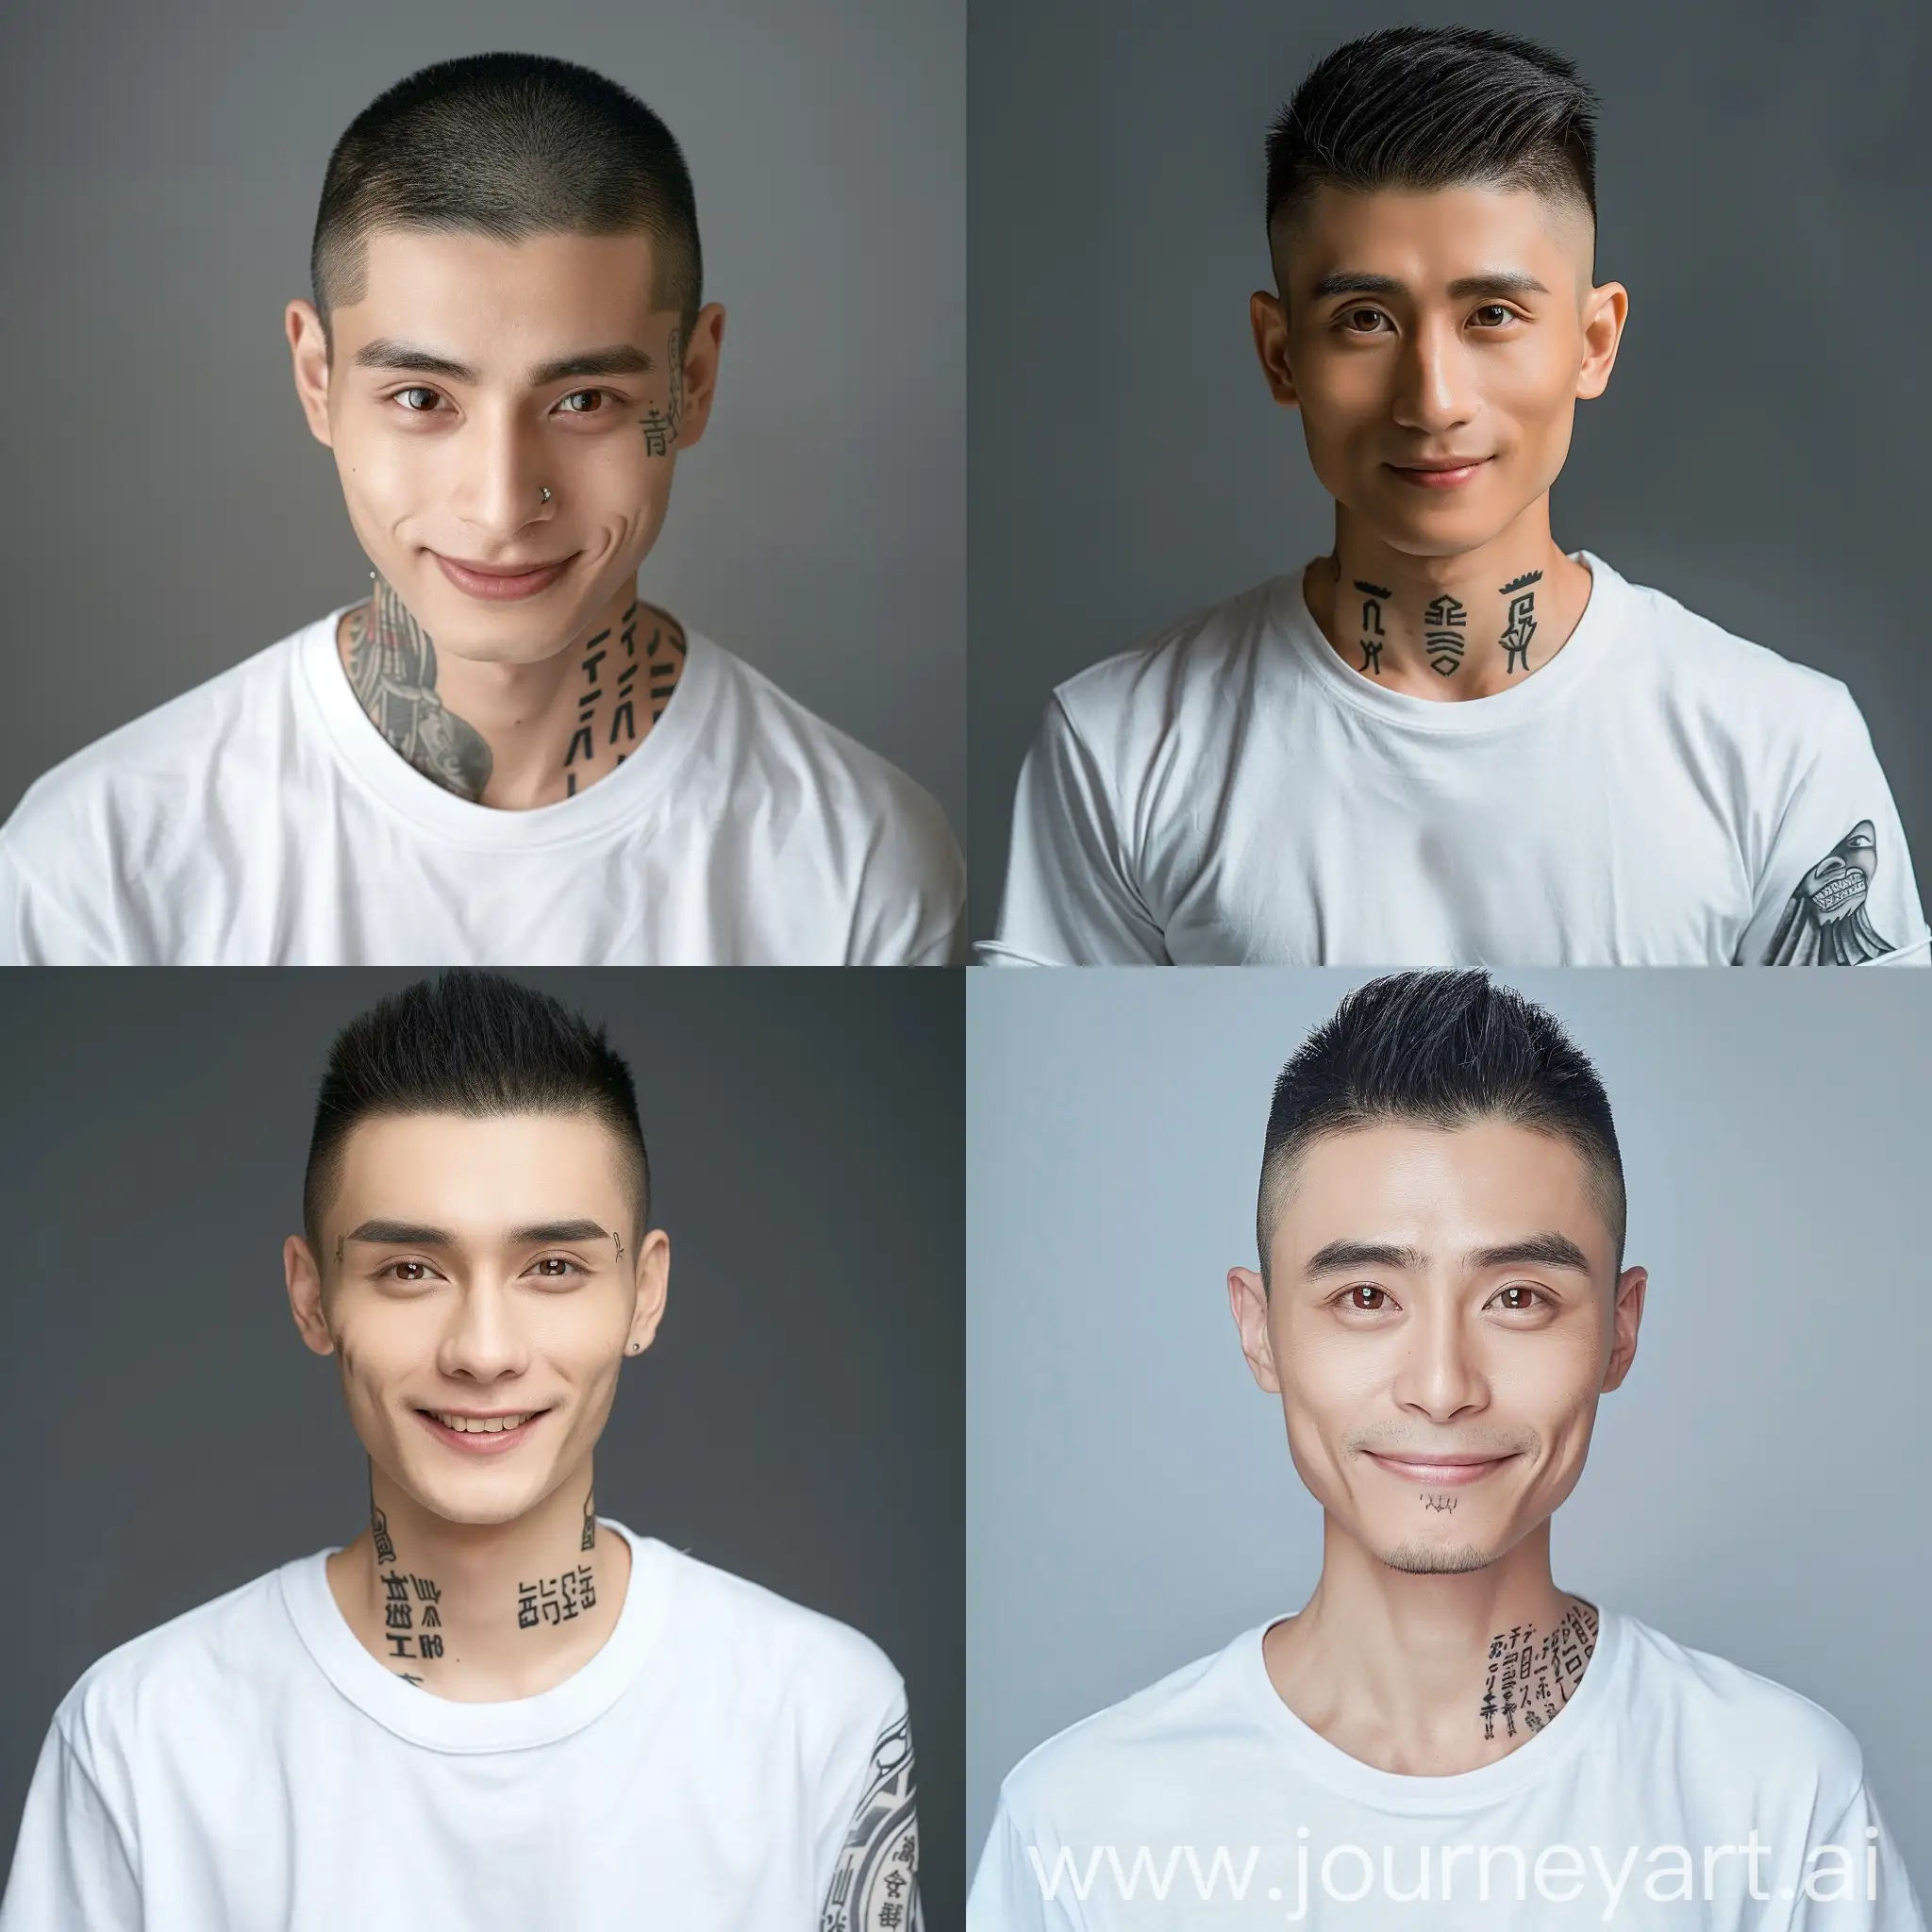 A skinny 24-year-old Chinese man in a white T-shirt, short sleek black and white hairstyle. brown eyes, narrow dark eyebrows, an evil smile on his face, tattoos on his pasterns in the form of hieroglyphs